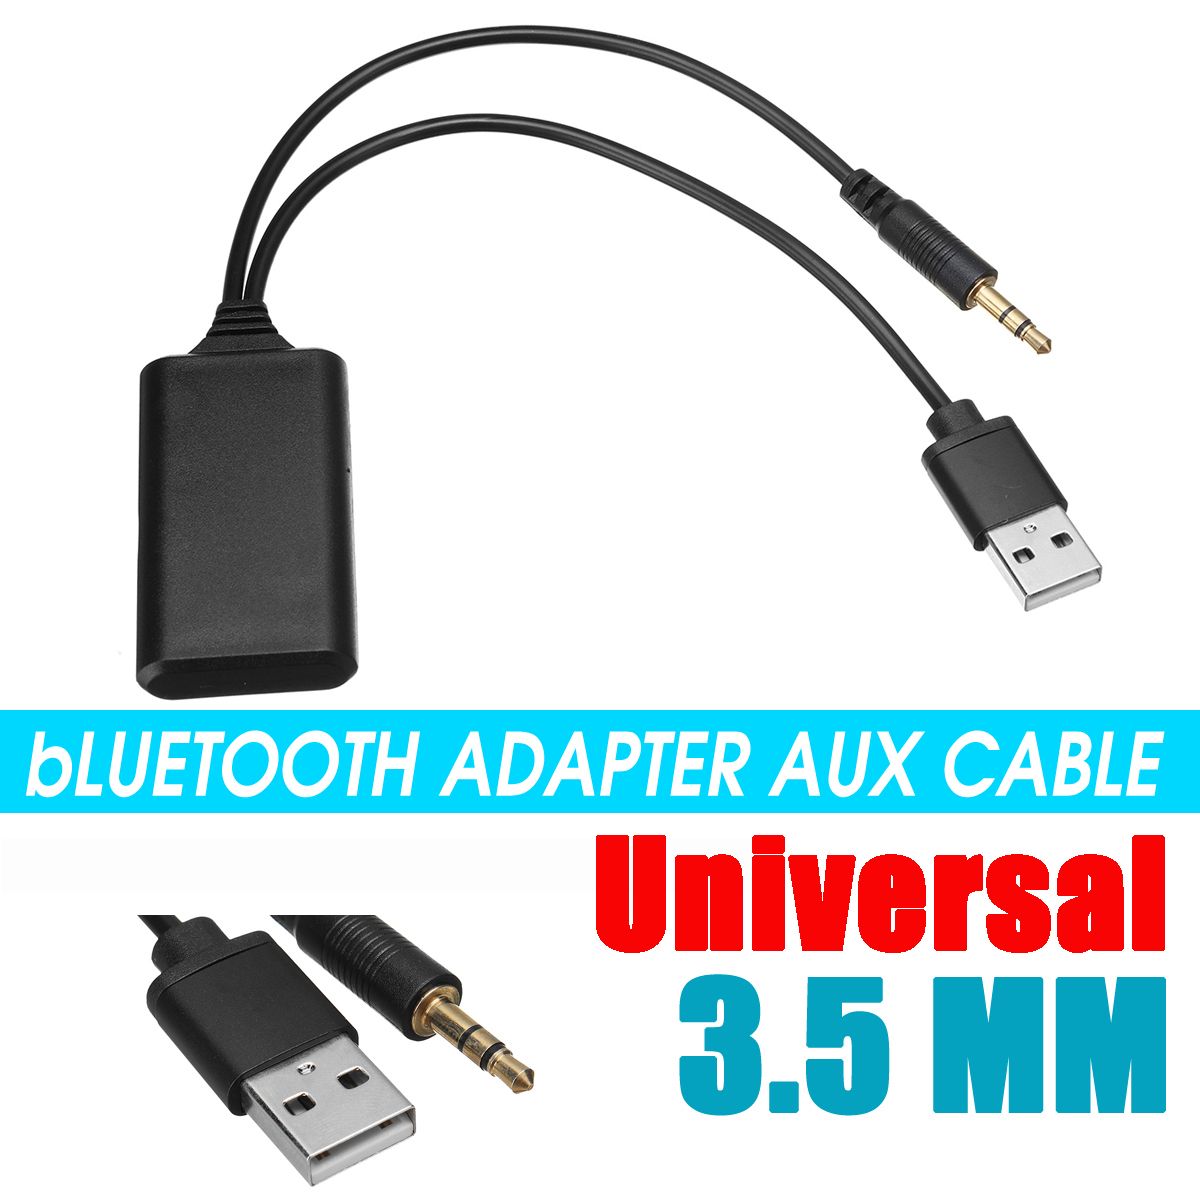 Universal-12V-Car-bluetooth-Module-Adapter-AUX-IN-AUX-Audio-Cable-Wireless-Radio-Stereo-USB-35MM-Jac-1526051